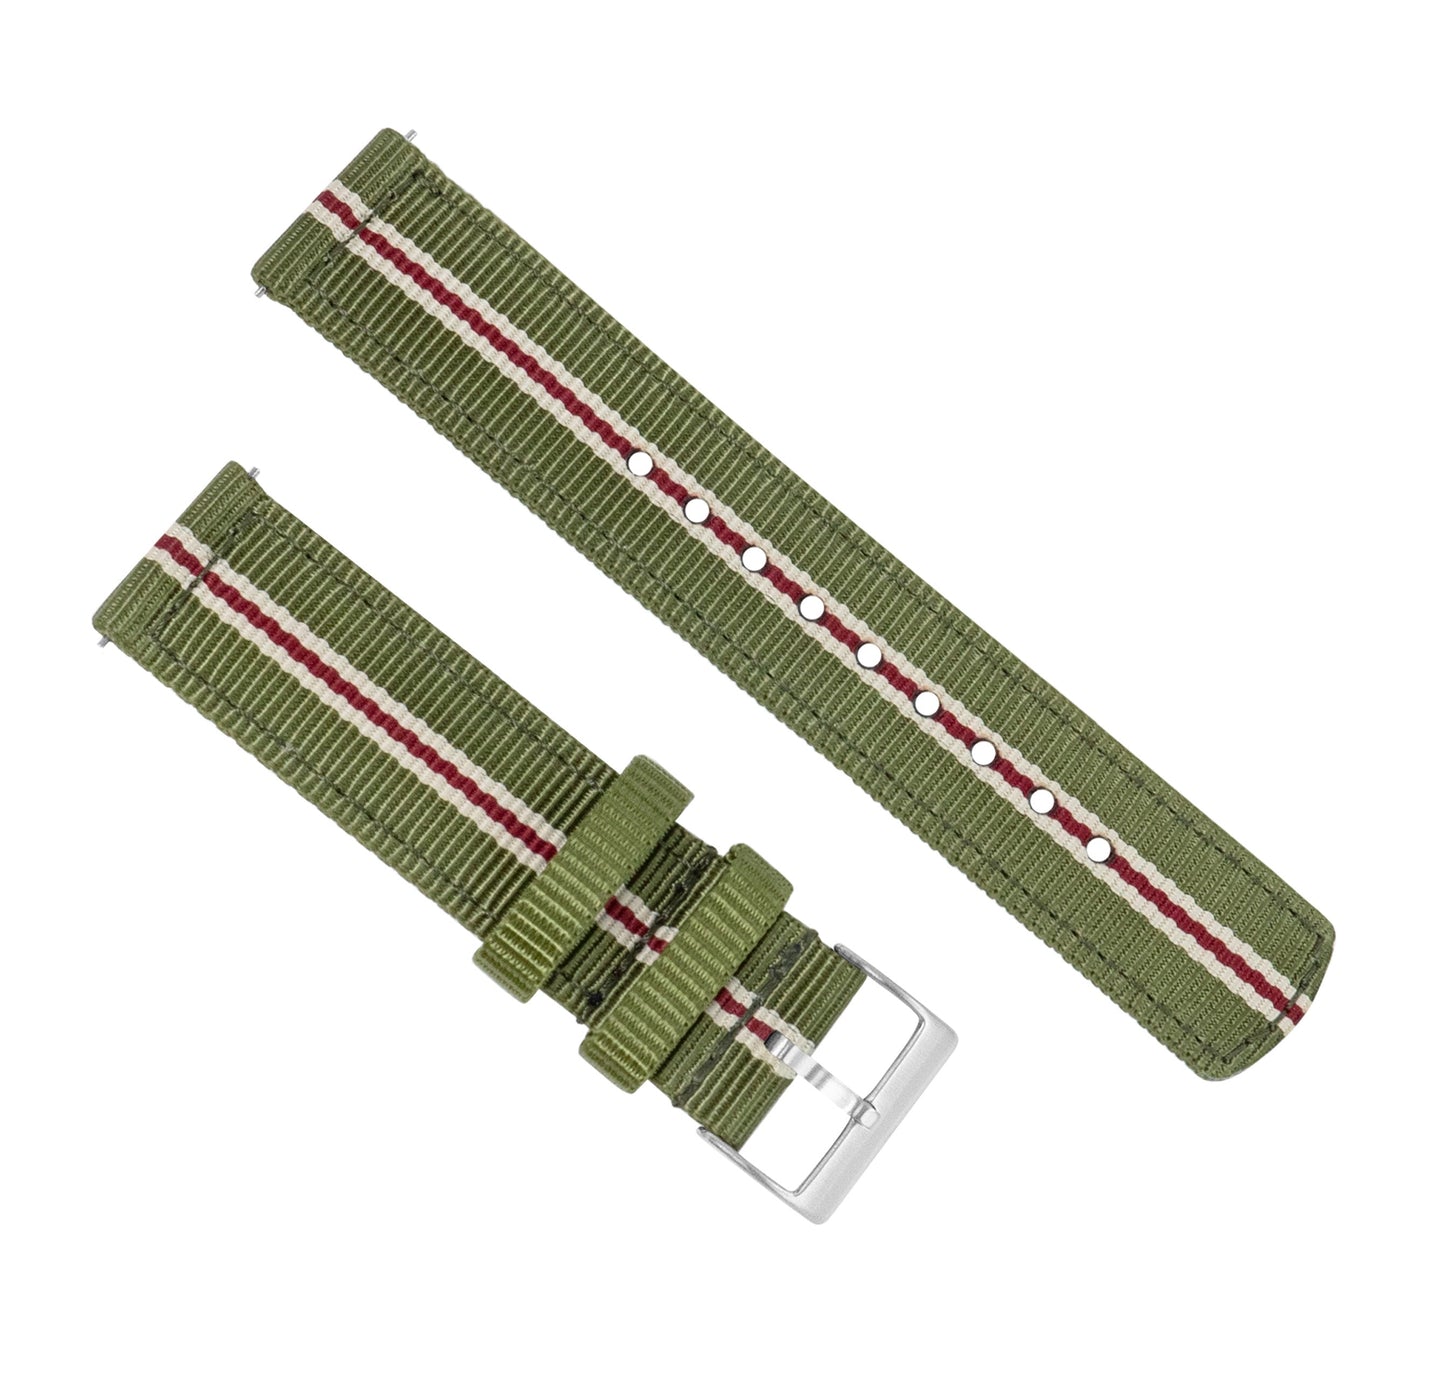 MOONSWATCH Bip | Two-Piece NATO Style | Army Green & Crimson - Barton Watch Bands